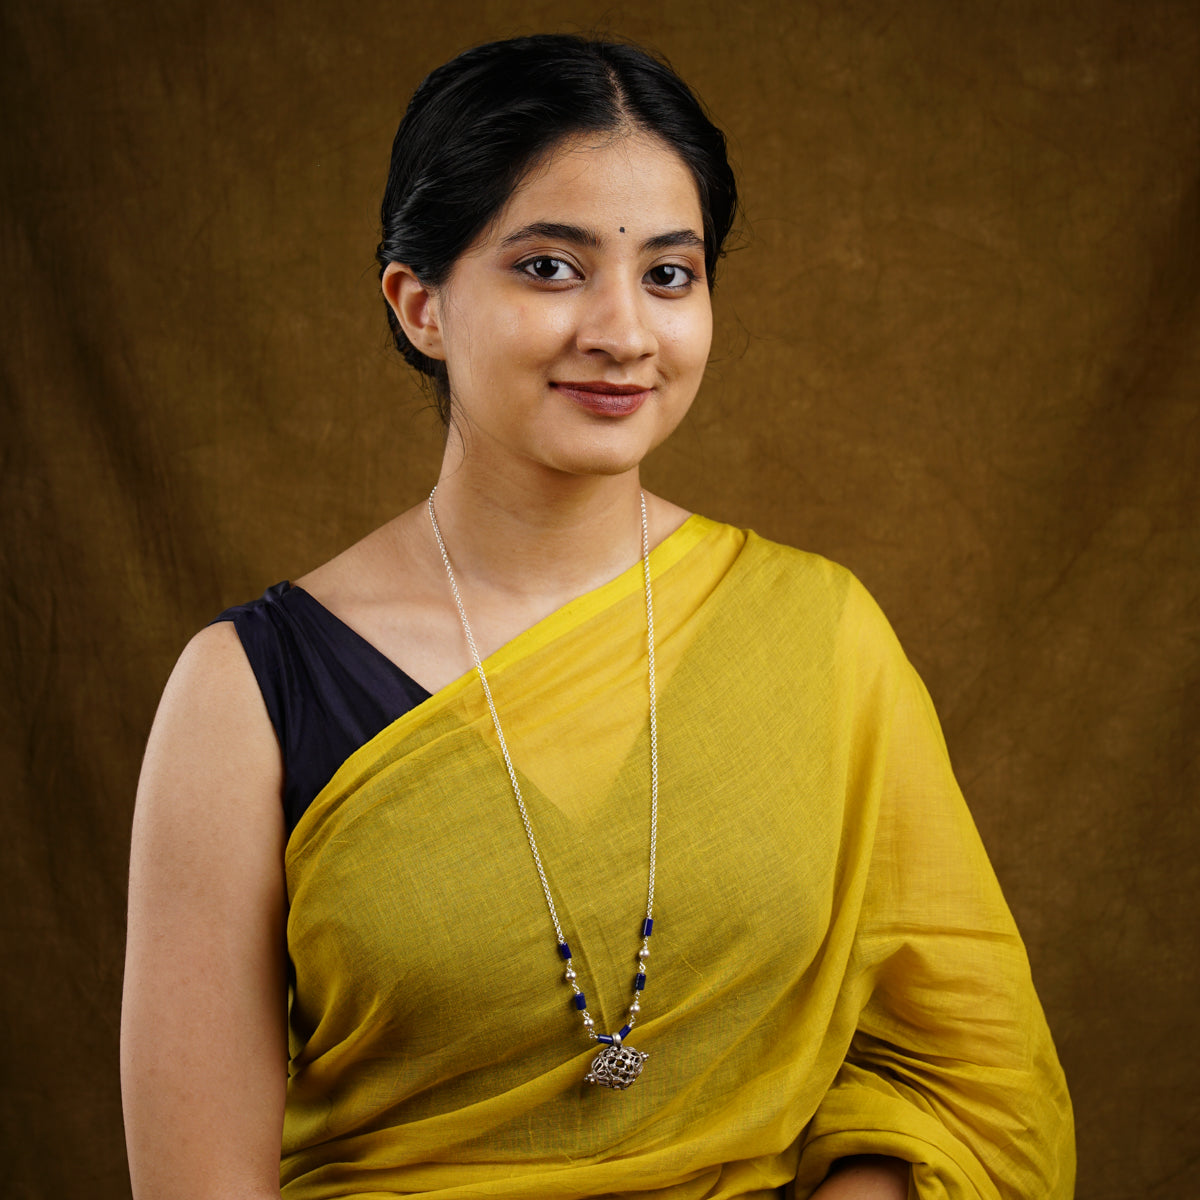 a woman wearing a yellow sari and a necklace